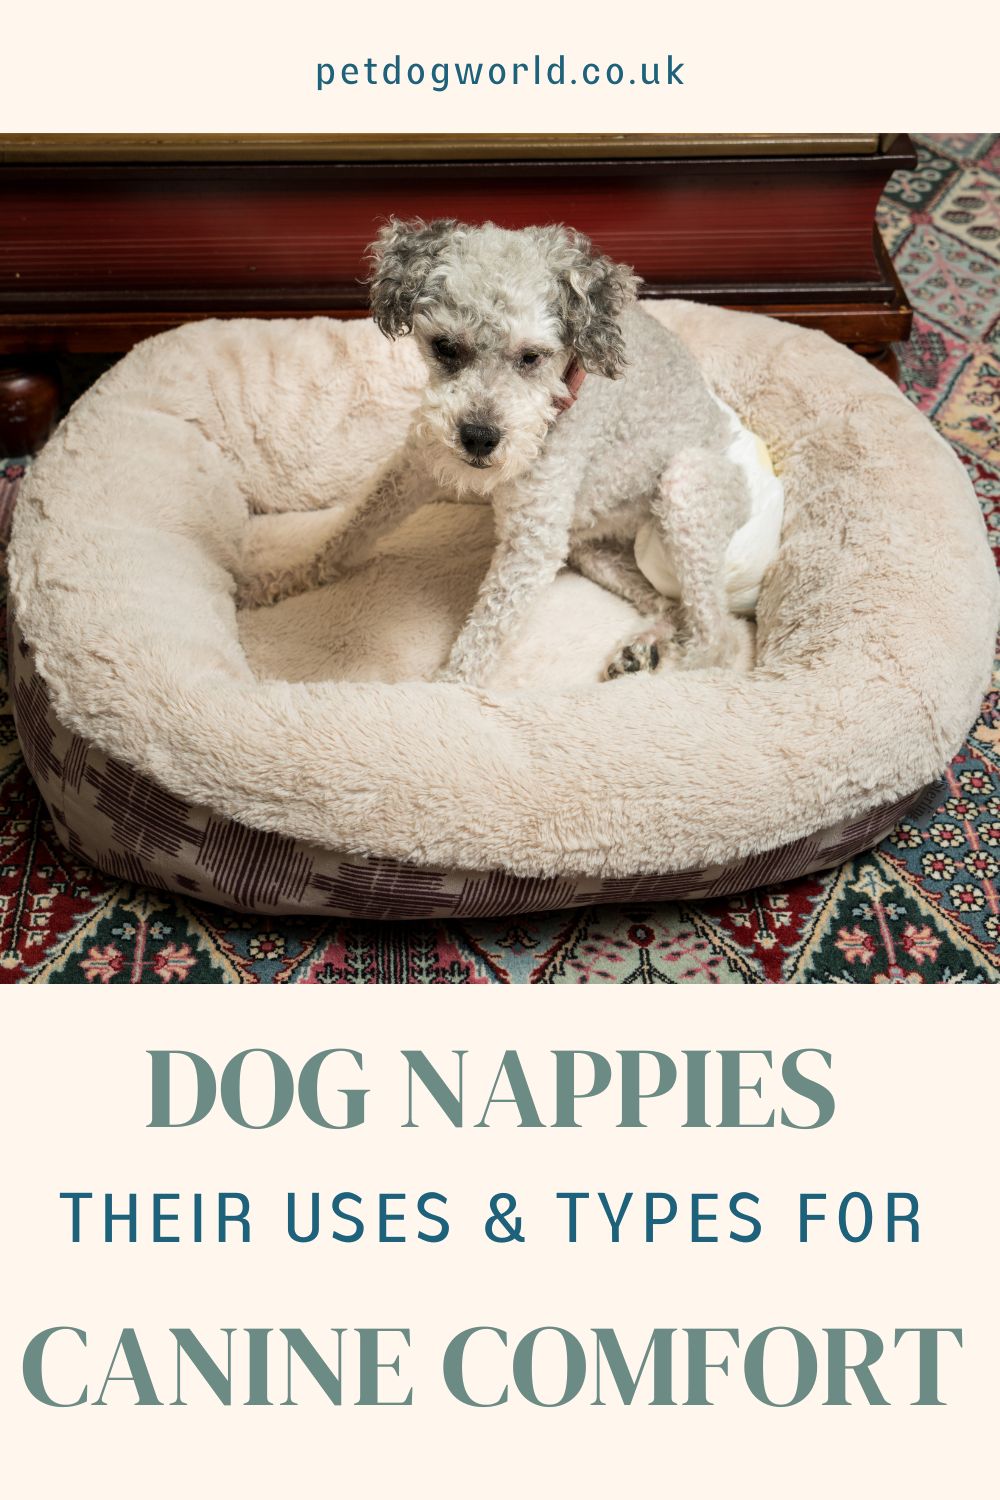 Discover the uses and types of dog nappies in our blog post. From managing incontinence to aiding post-surgery recovery, we explore practical solutions for your dog's comfort.